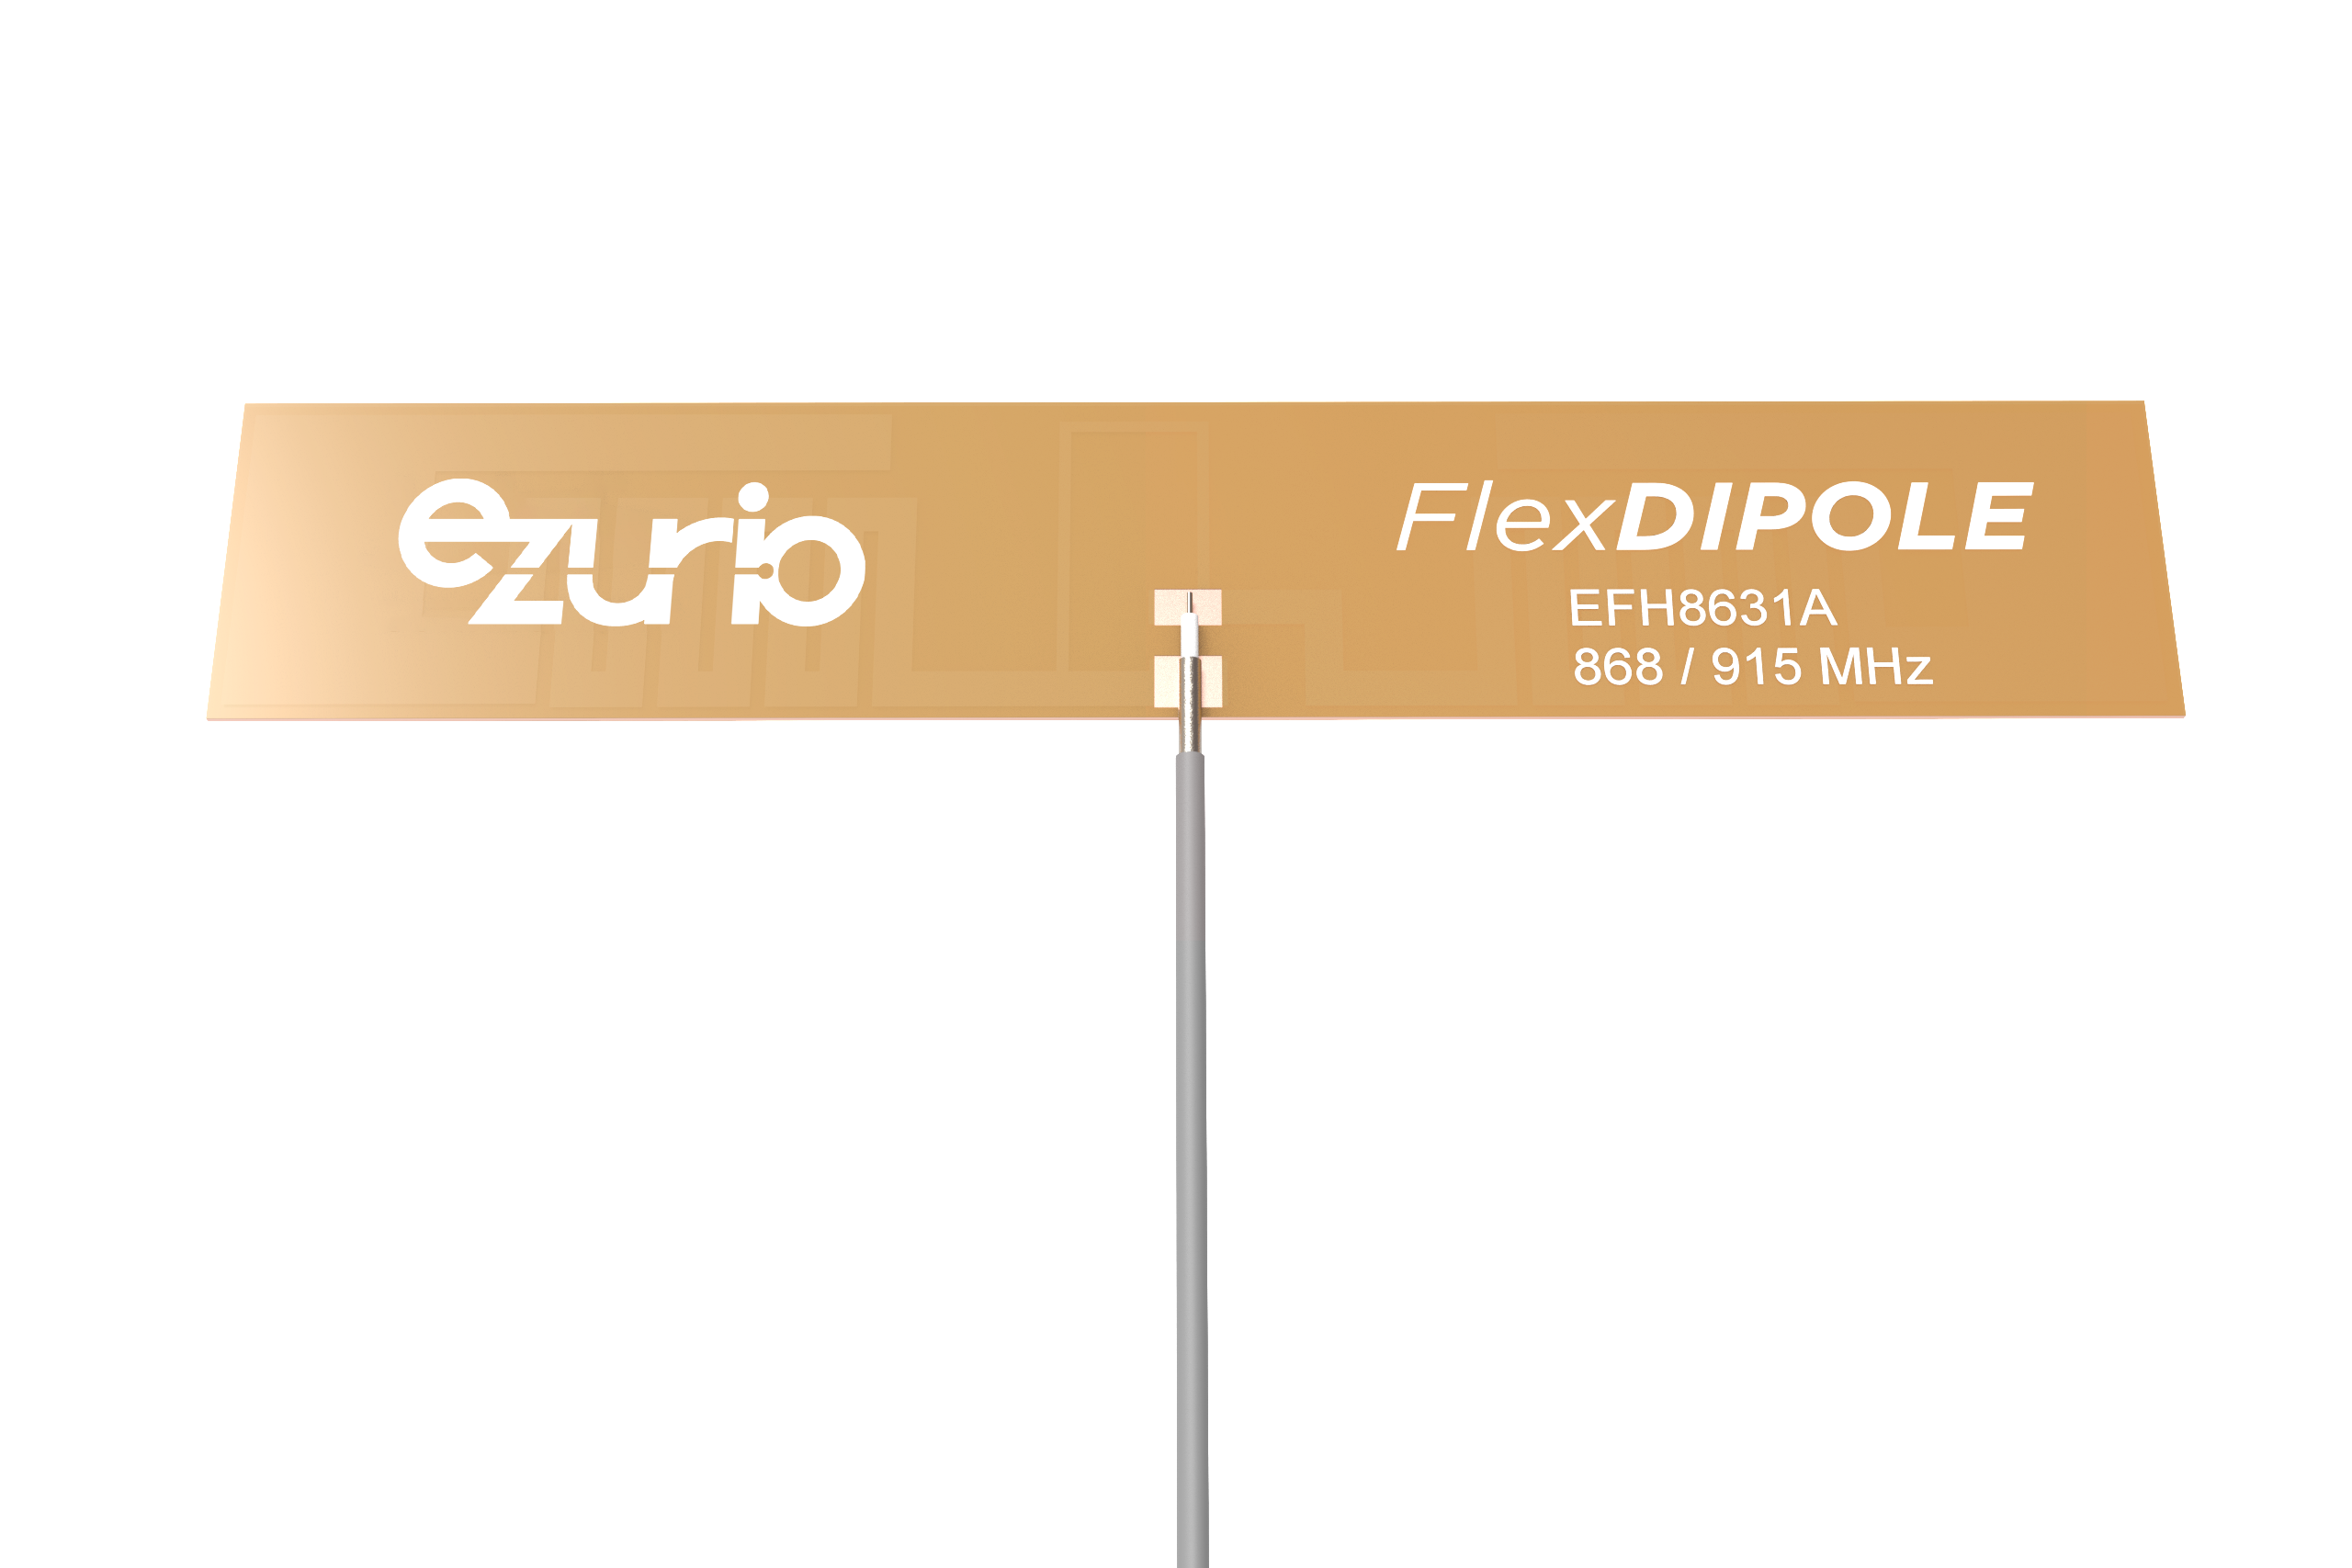 Now in Stock: Single FlexDIPOLE Antenna Solution for Entire 863-928MHz Frequency Range